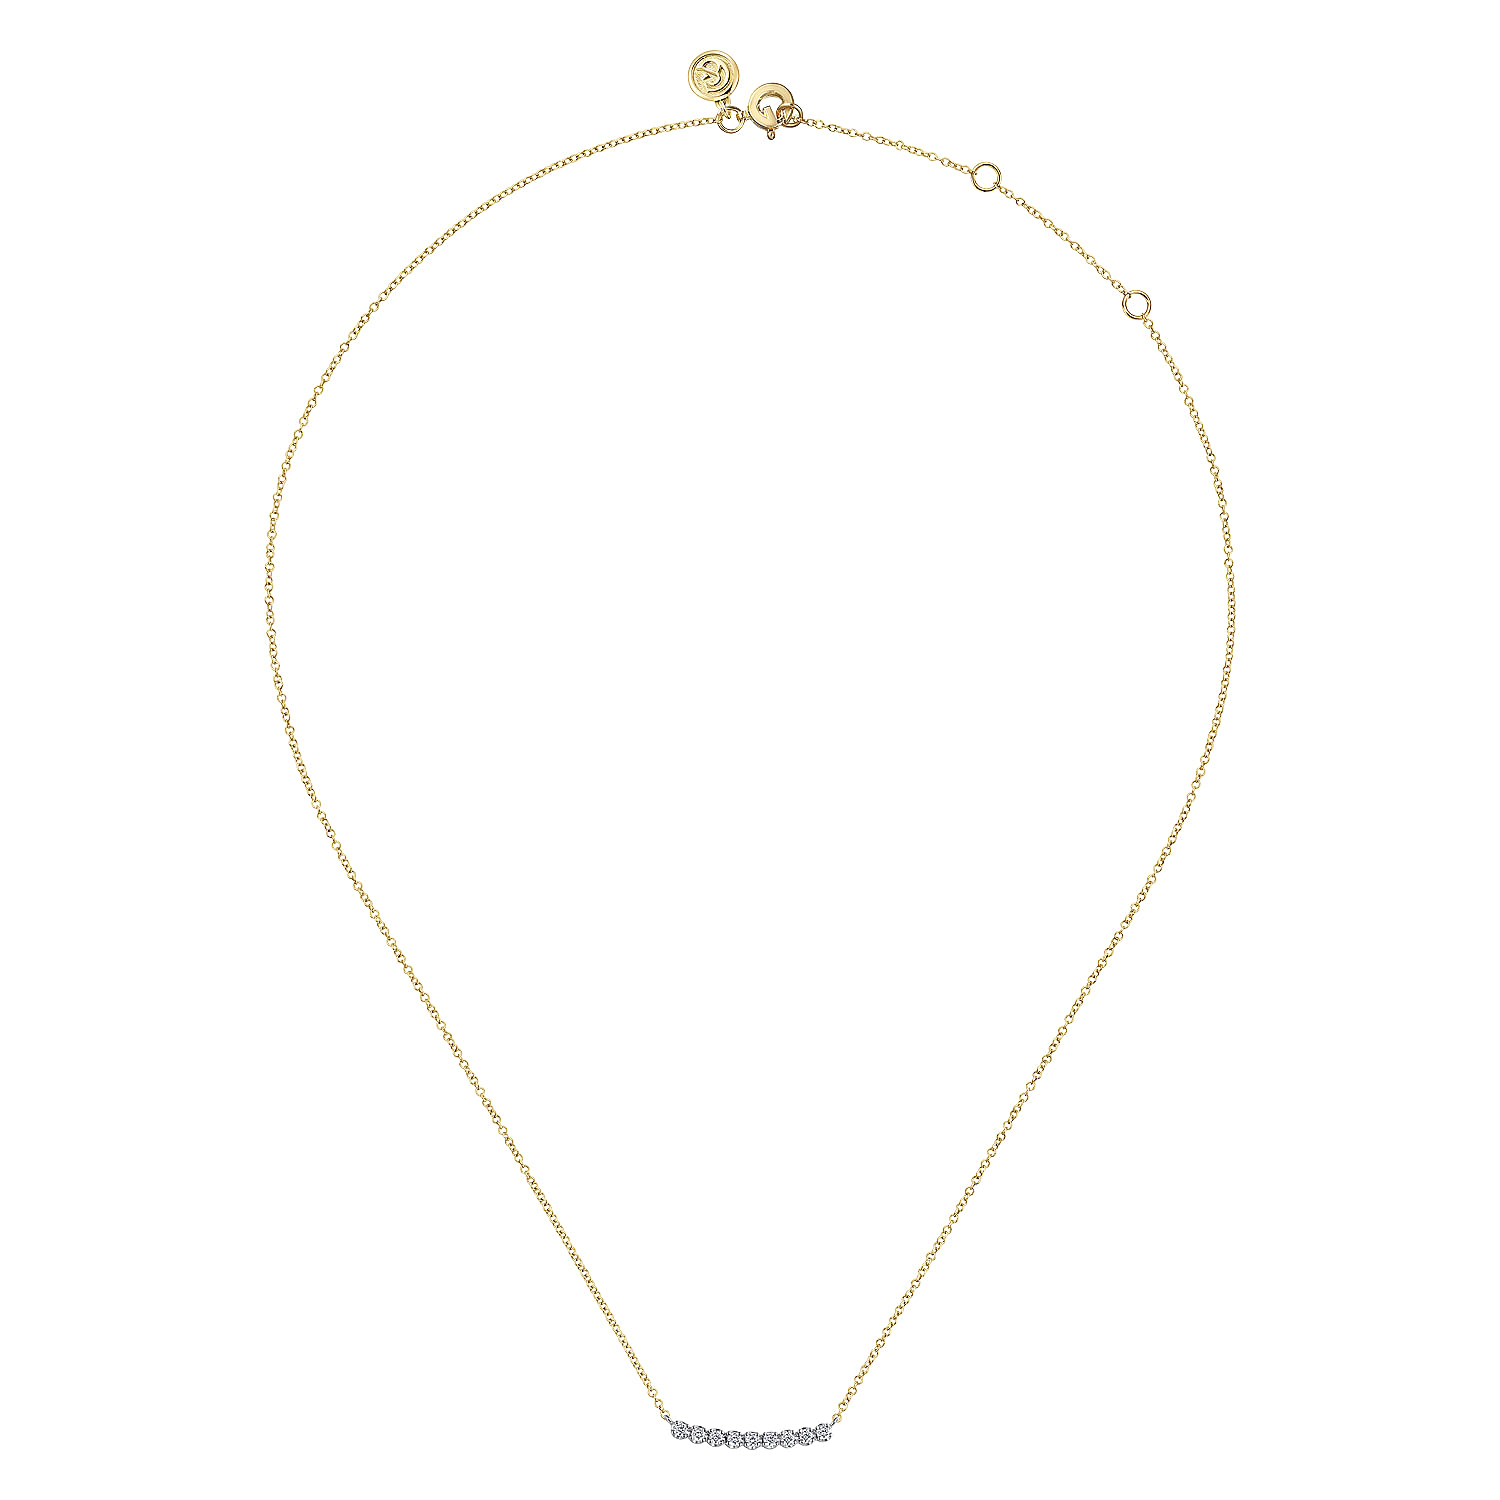 14K White and Yellow Gold White Sapphire Bar Necklace